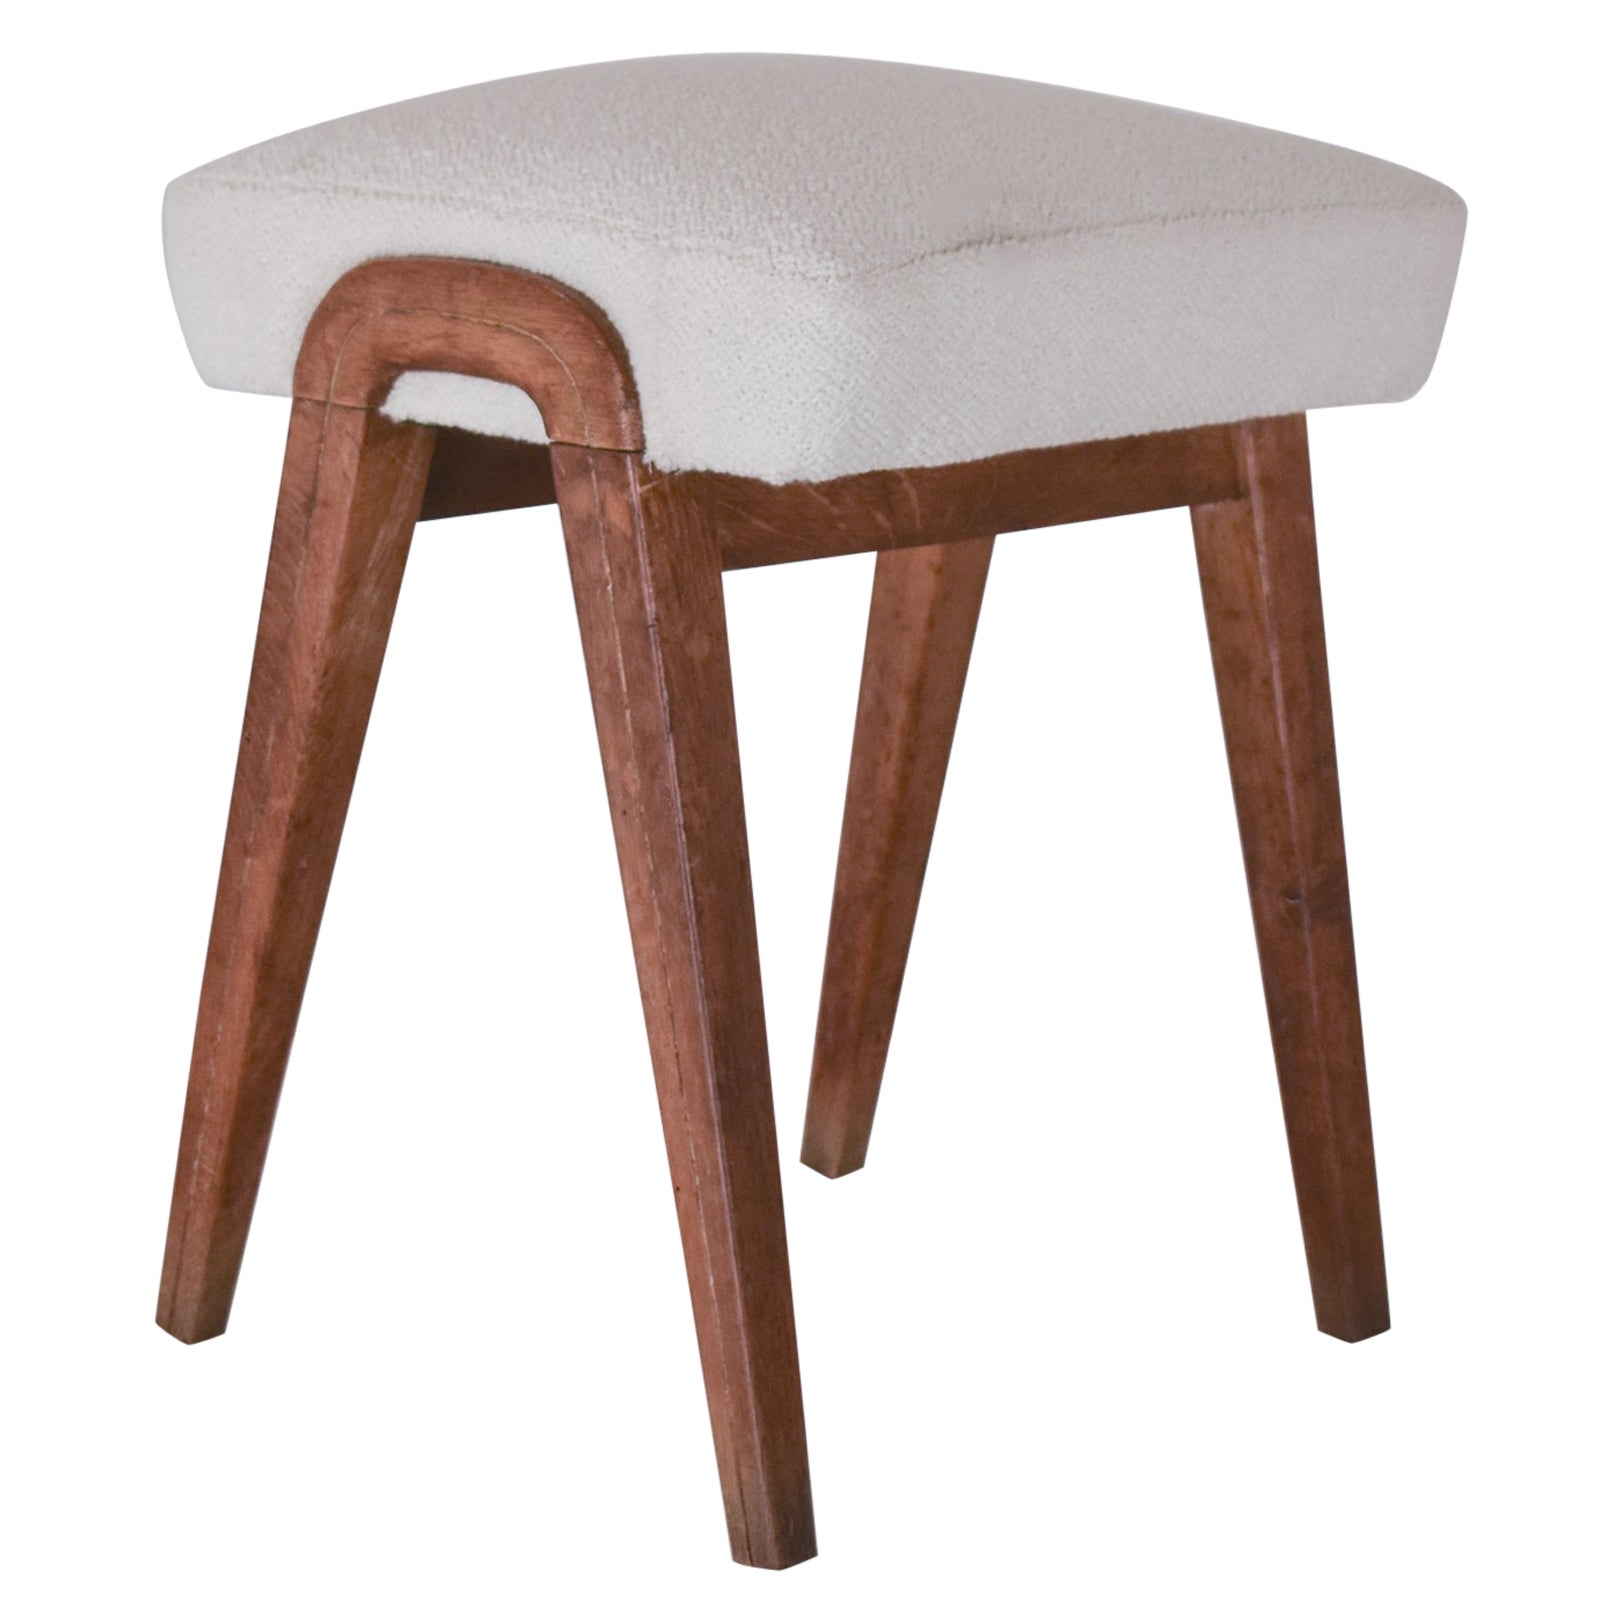 Spanish midcentury stool in oak wood and white textile.1960's